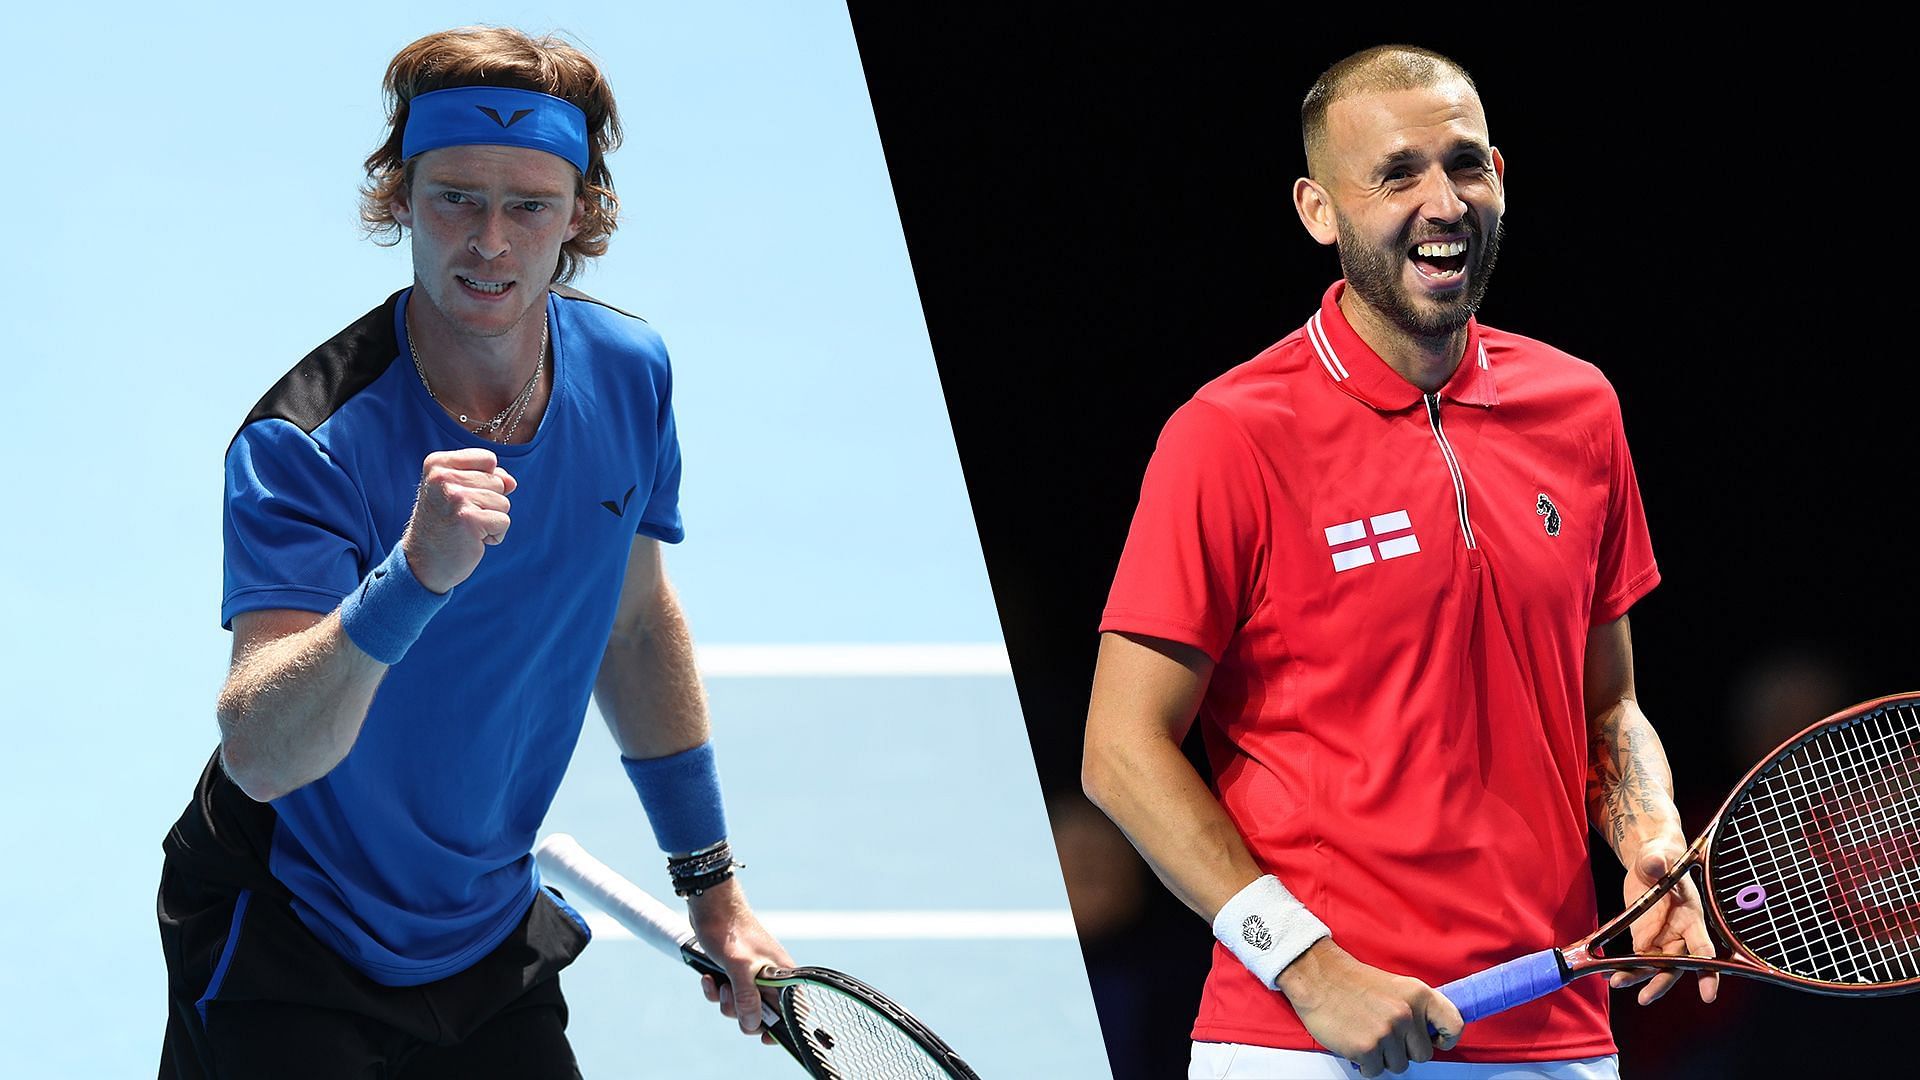 Australian Open 2023 Andrey Rublev vs Dan Evans preview, head-to-head, prediction, odds and pick